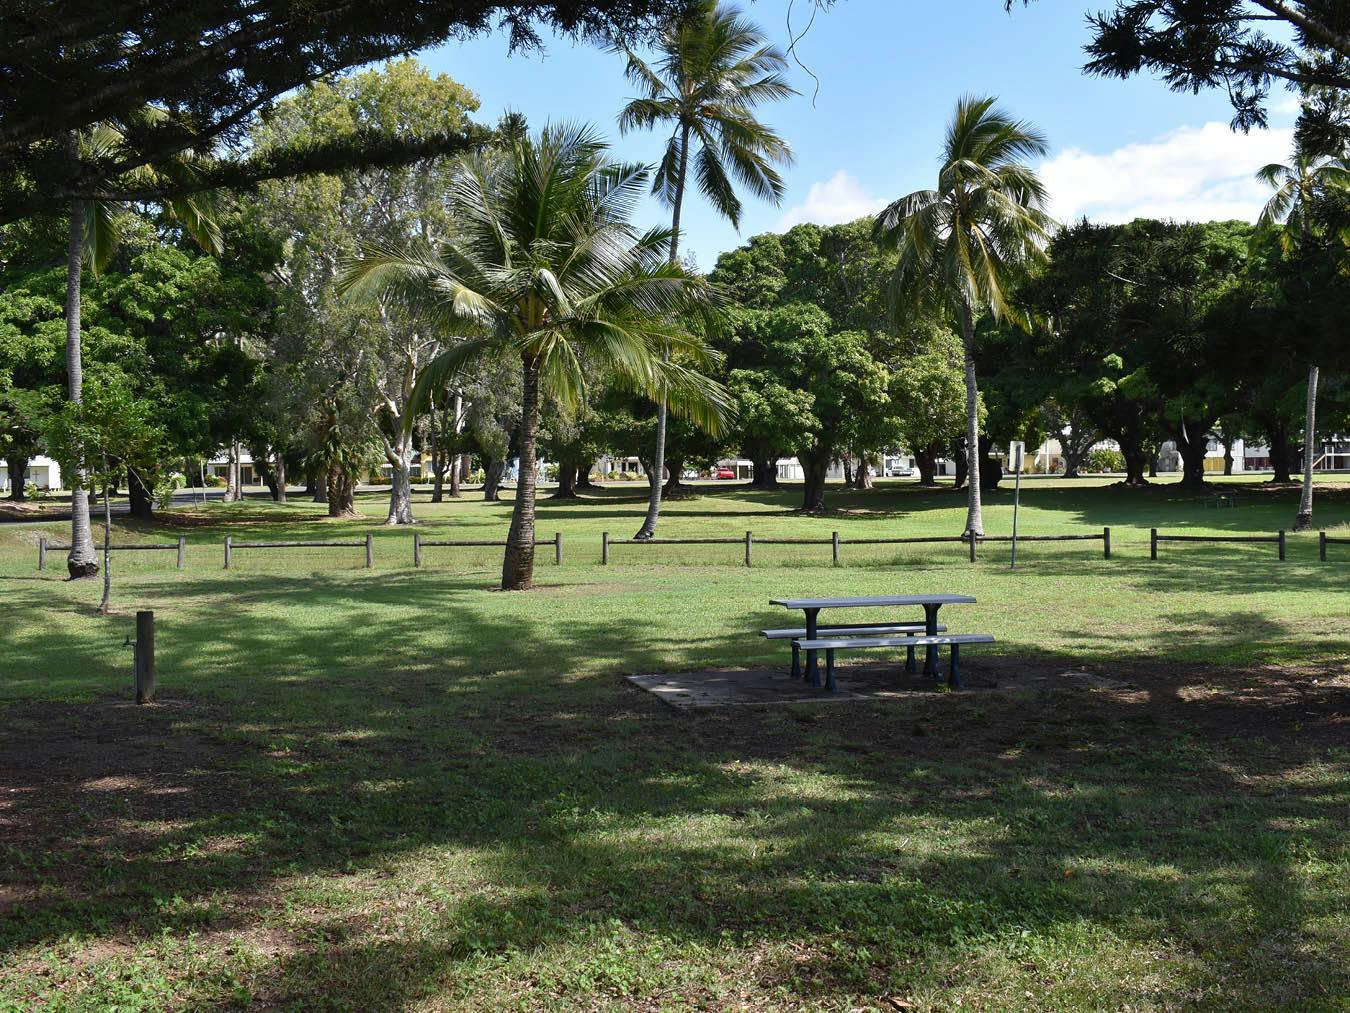 This photograph is looking south across the reserve of a picnic area.